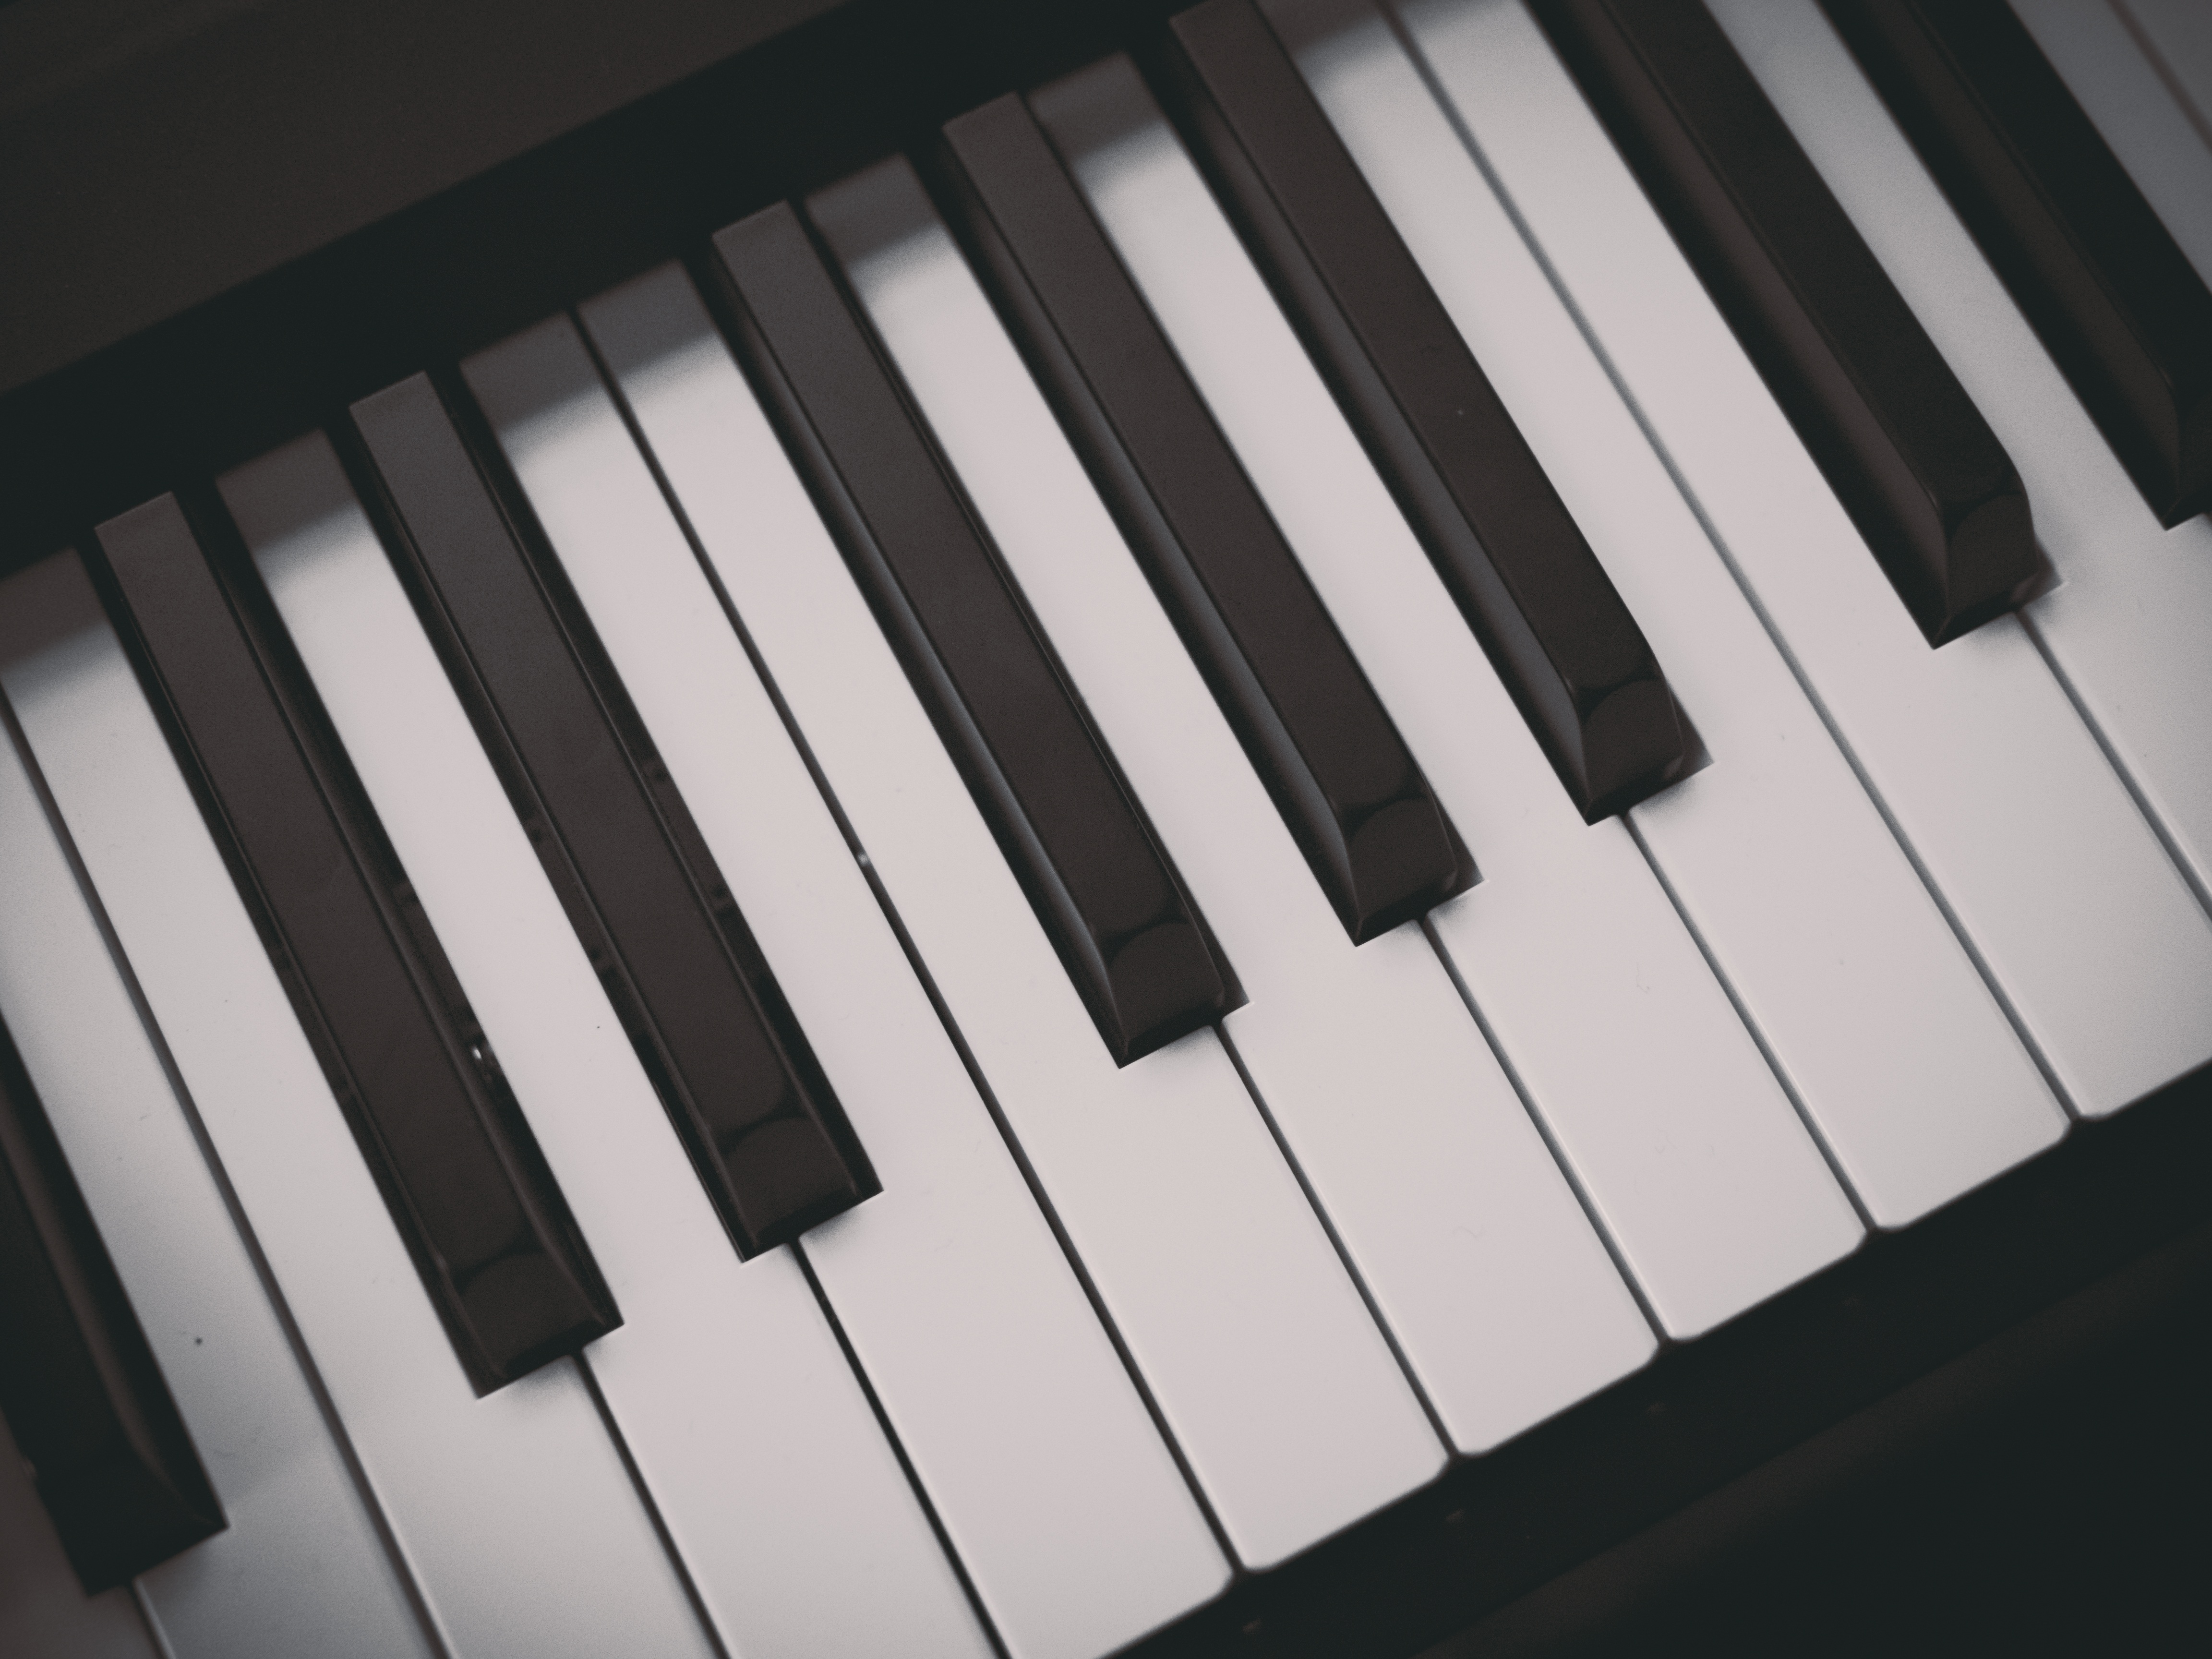 musical instrument, piano, keys, music images